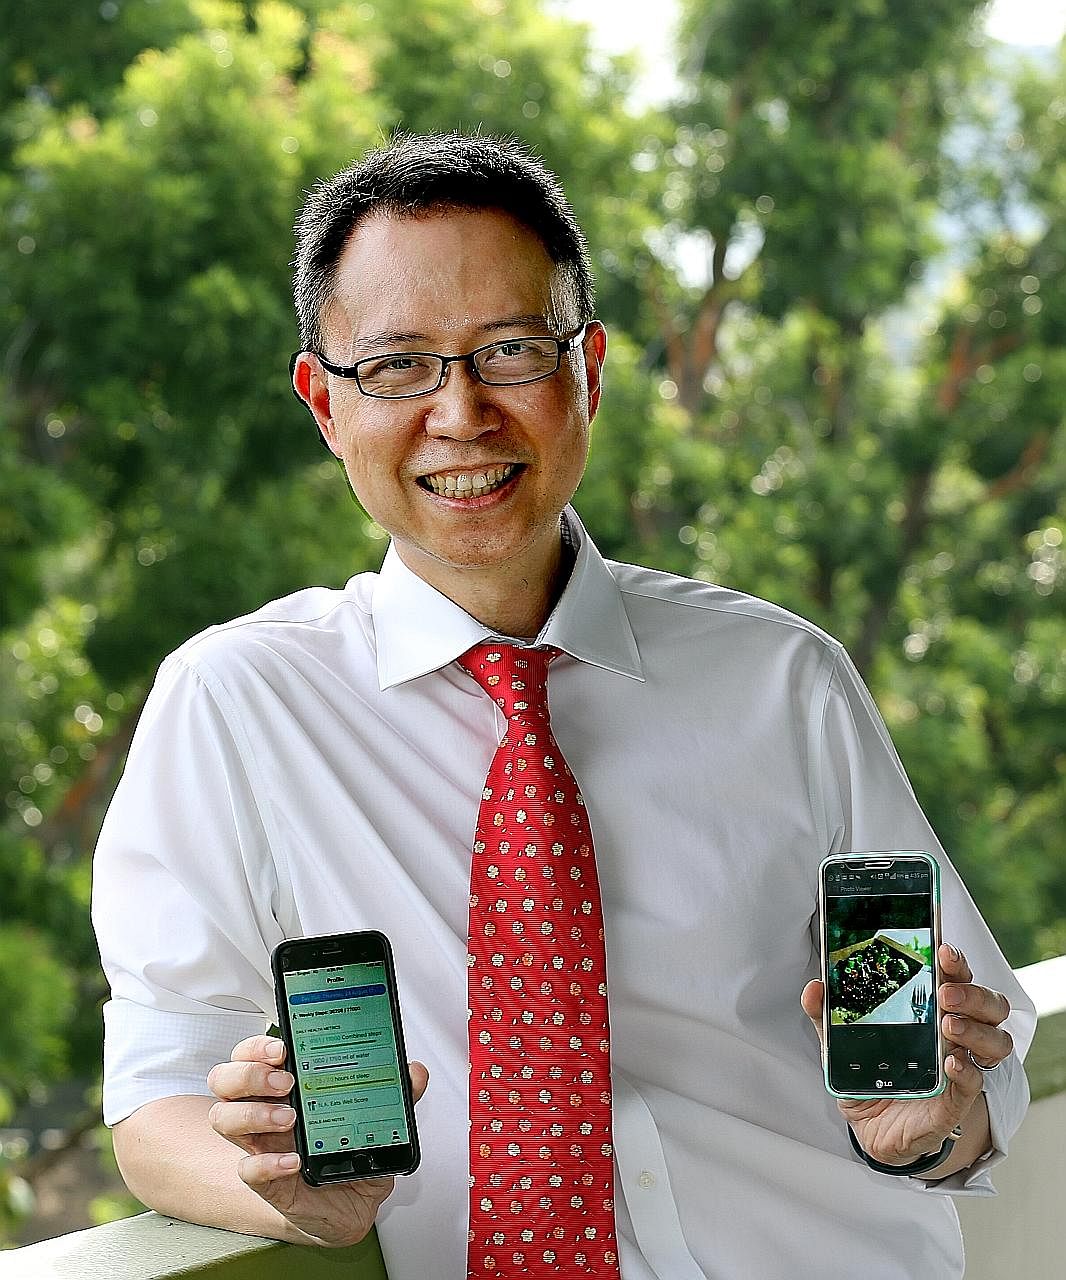 Dr Peter Ting, a cardiologist at Gleneagles Hospital, is the co-founder of Cardiatrics, one of several tech-based healthcare start-ups based in Singapore.